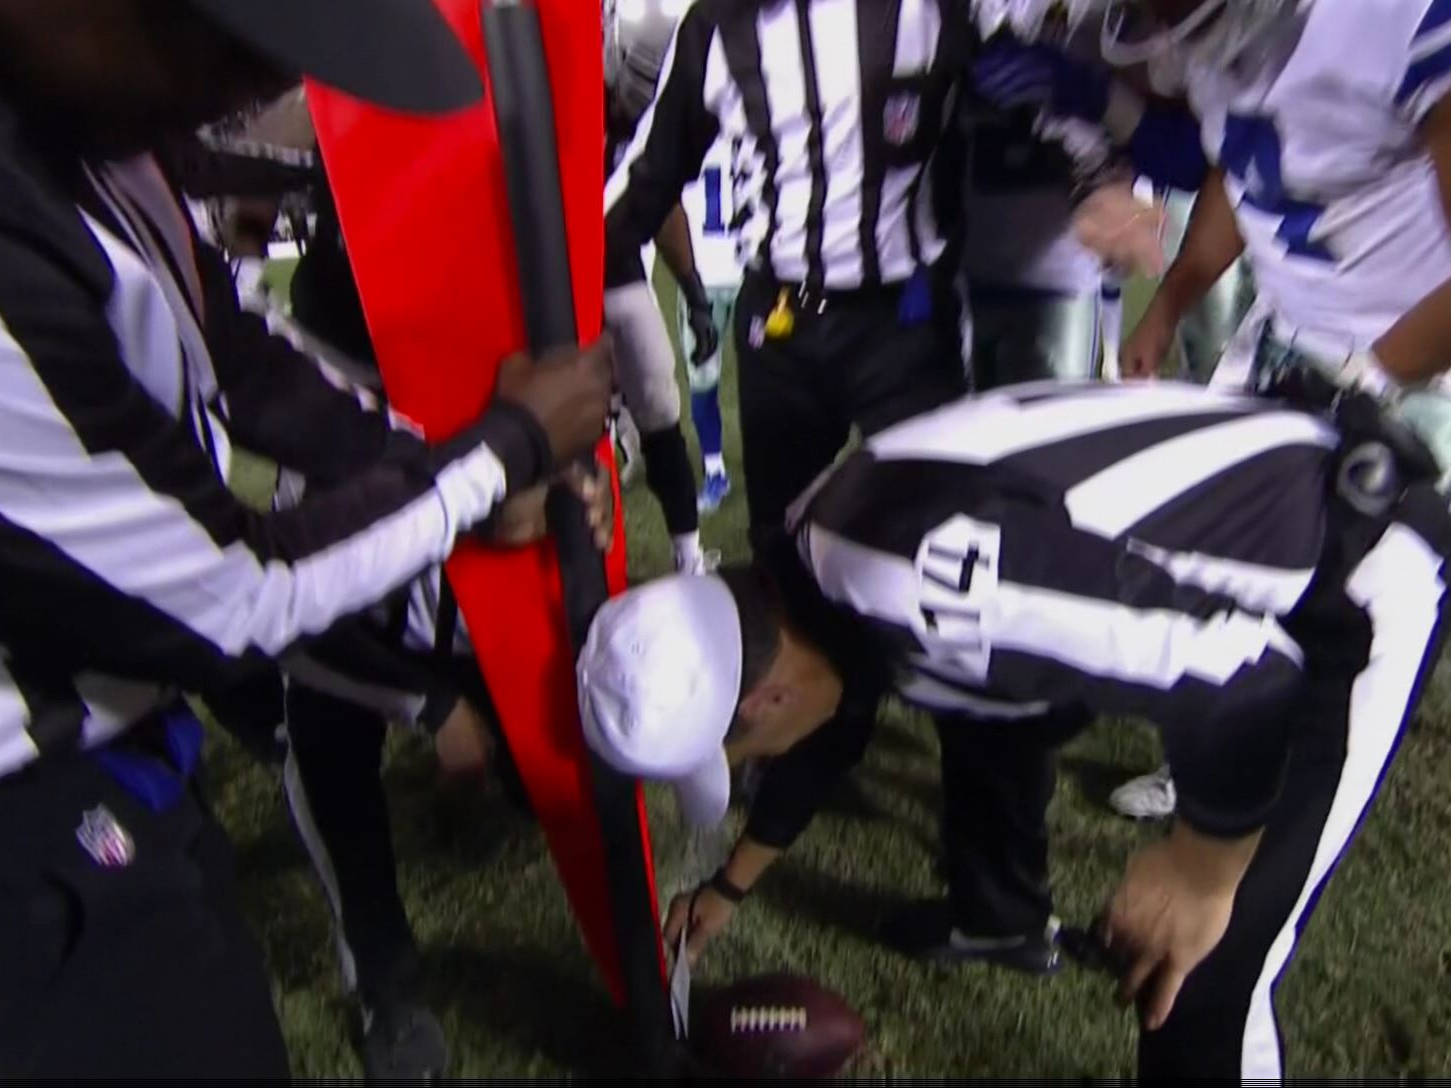 dallas-cowboys-win-game-after-ref-decided-a-crucial-4th-down-measurement-using-an-index-card.jpg